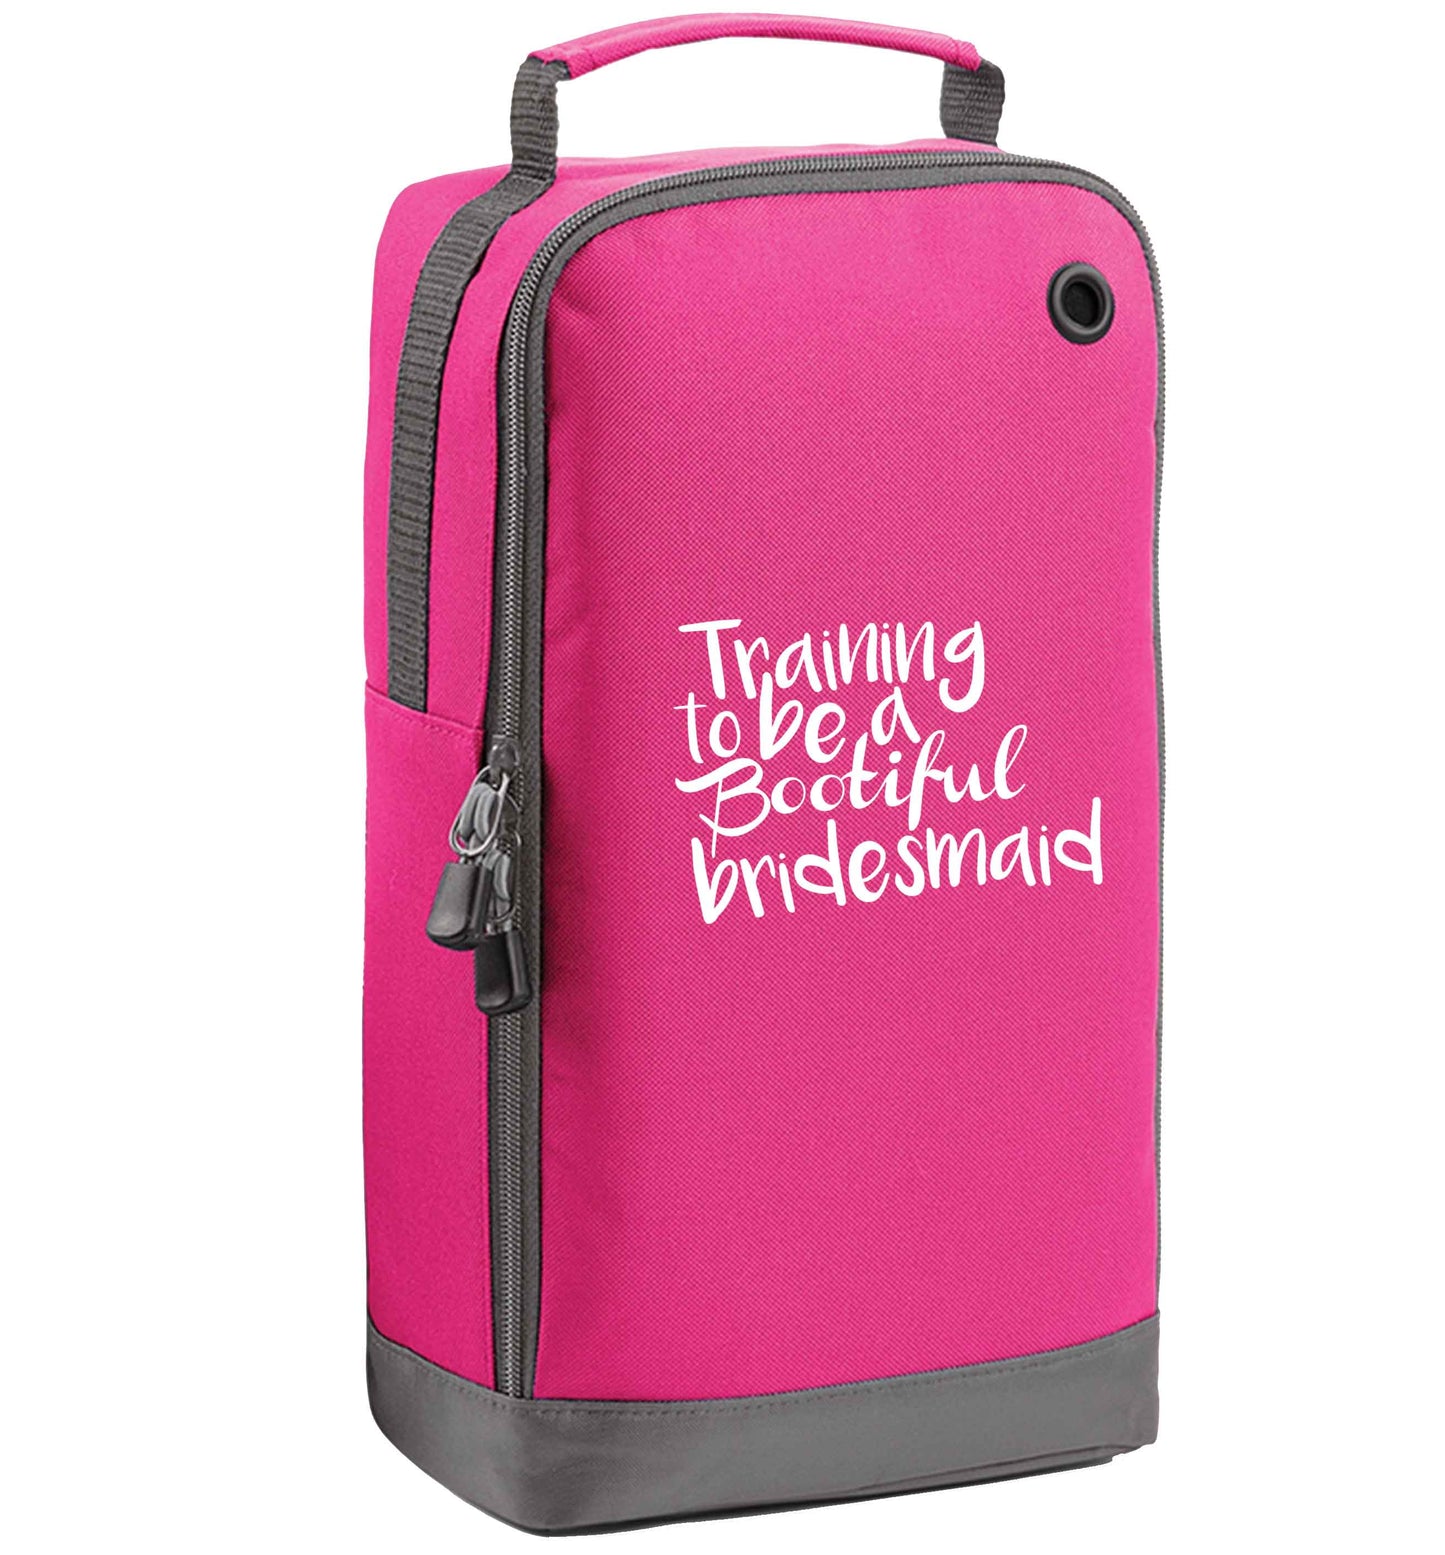 Get motivated and get fit for your big day! Our workout quotes and designs will get you ready to sweat! Perfect for any bride, groom or bridesmaid to be!  pink sports shoe bag vertical print